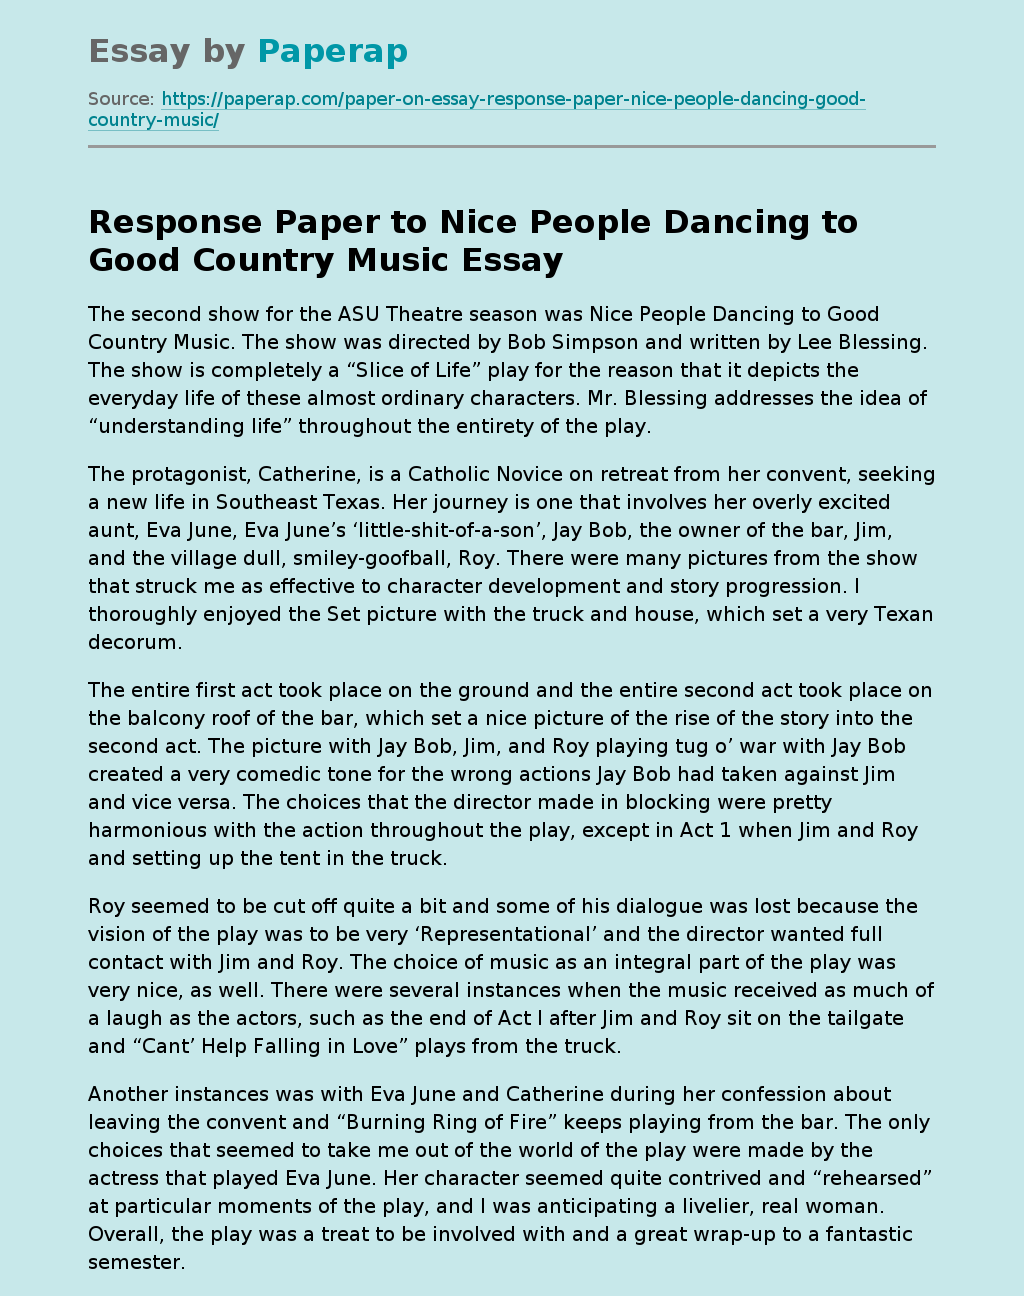 Response Paper to Nice People Dancing to Good Country Music